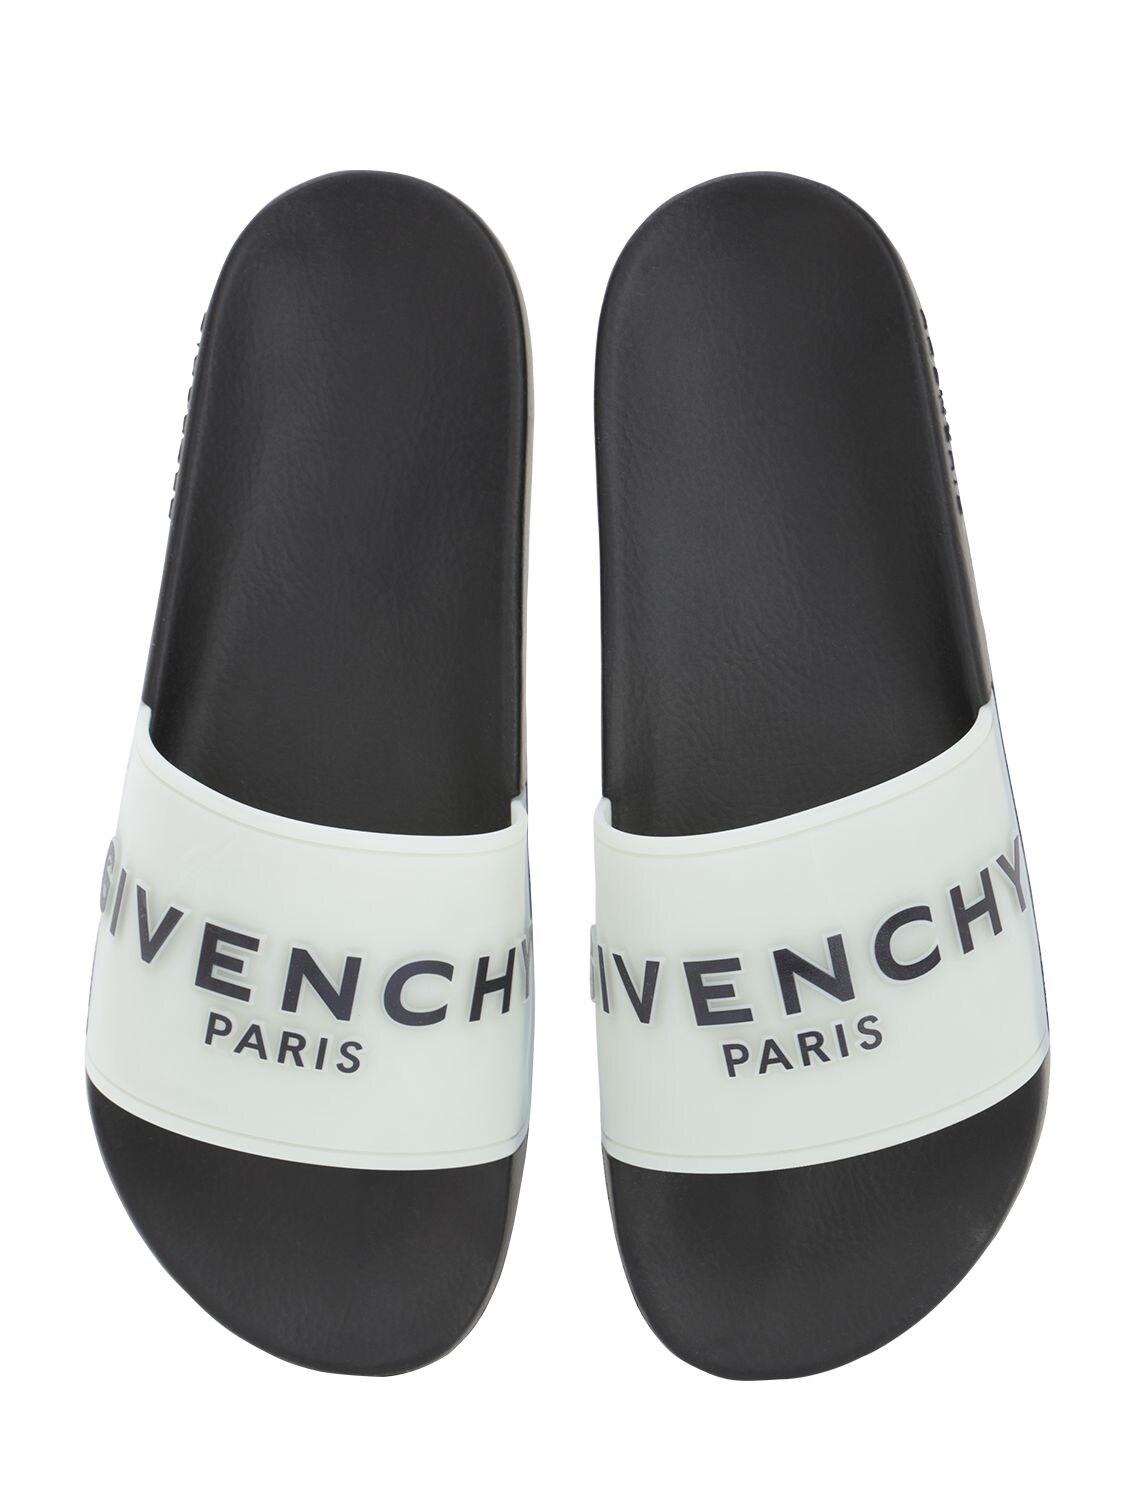 Givenchy Glow-in-the-dark Rubber Slide 